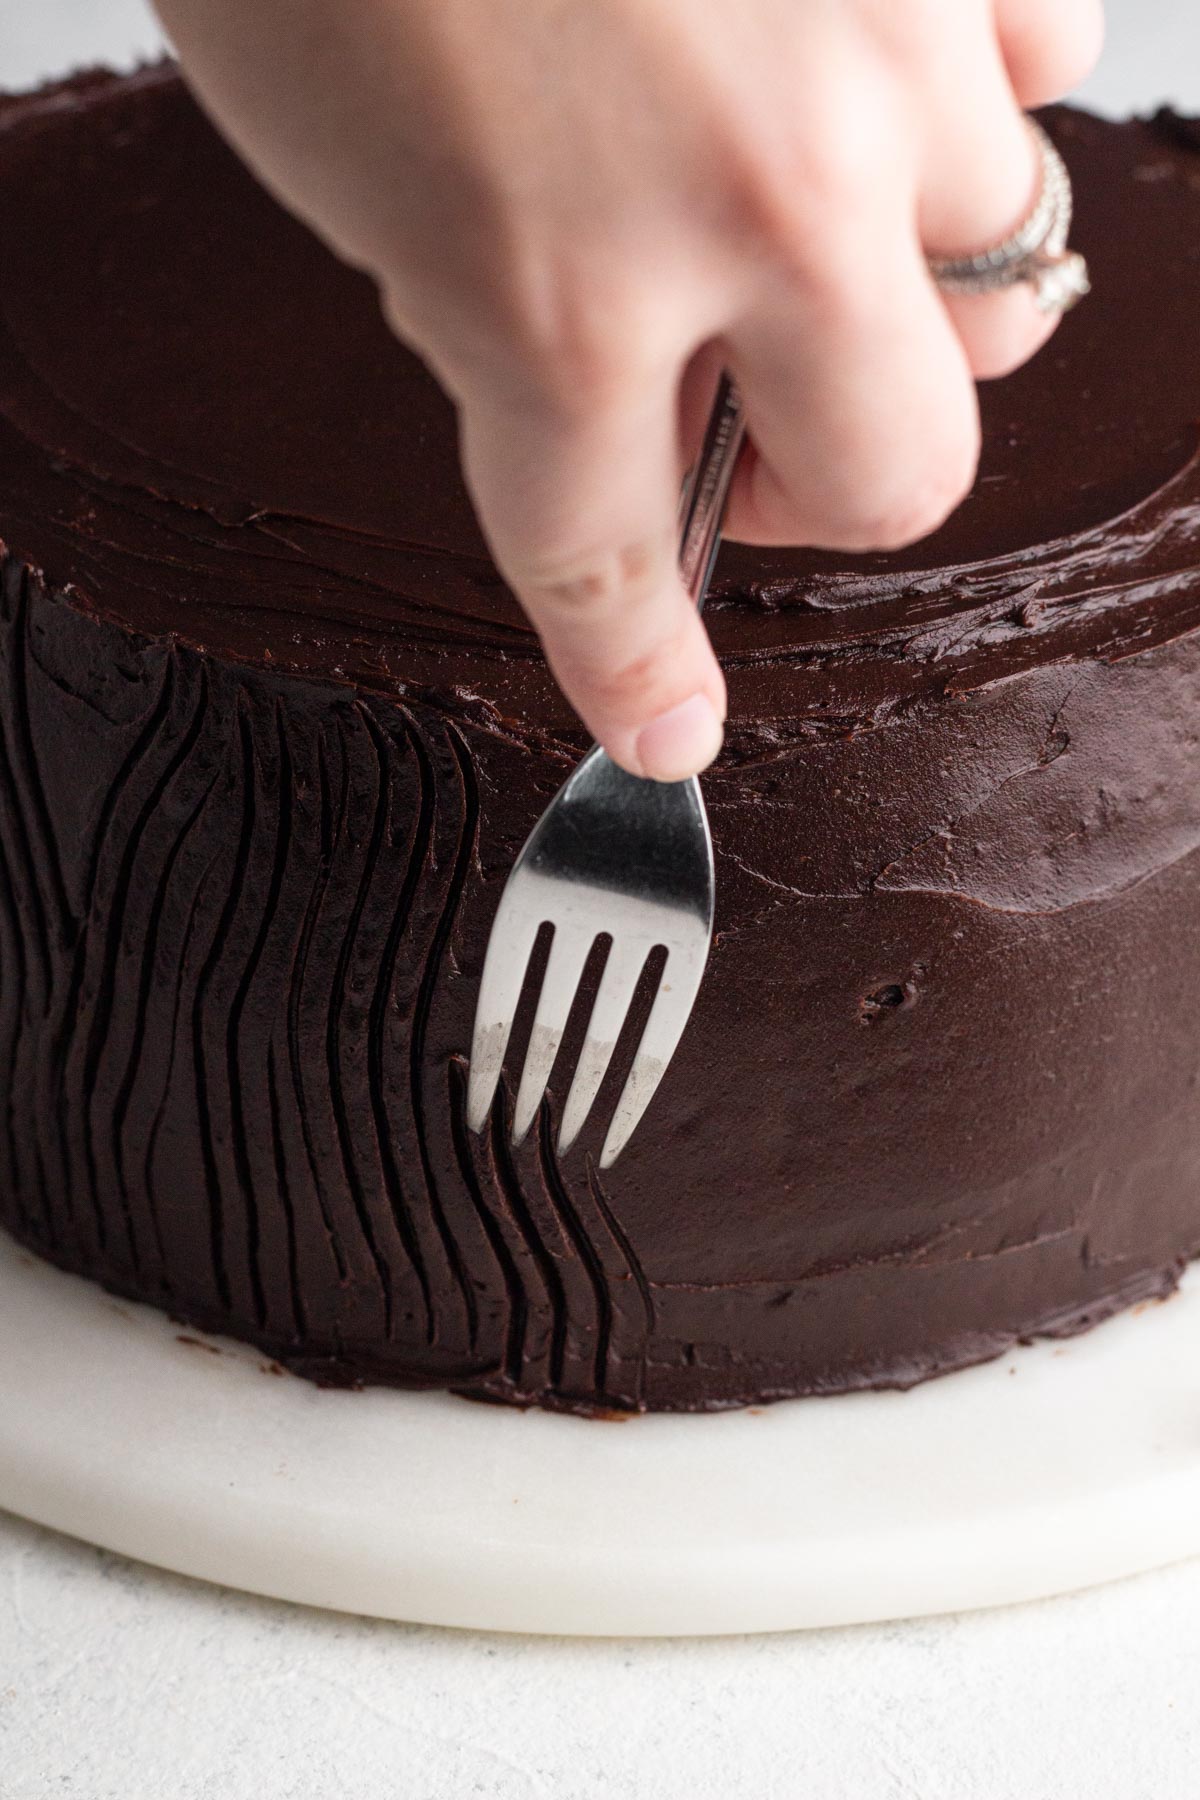 Hand holding a fork and dragging it through chocolate frosting to create a lined pattern in the frosting.